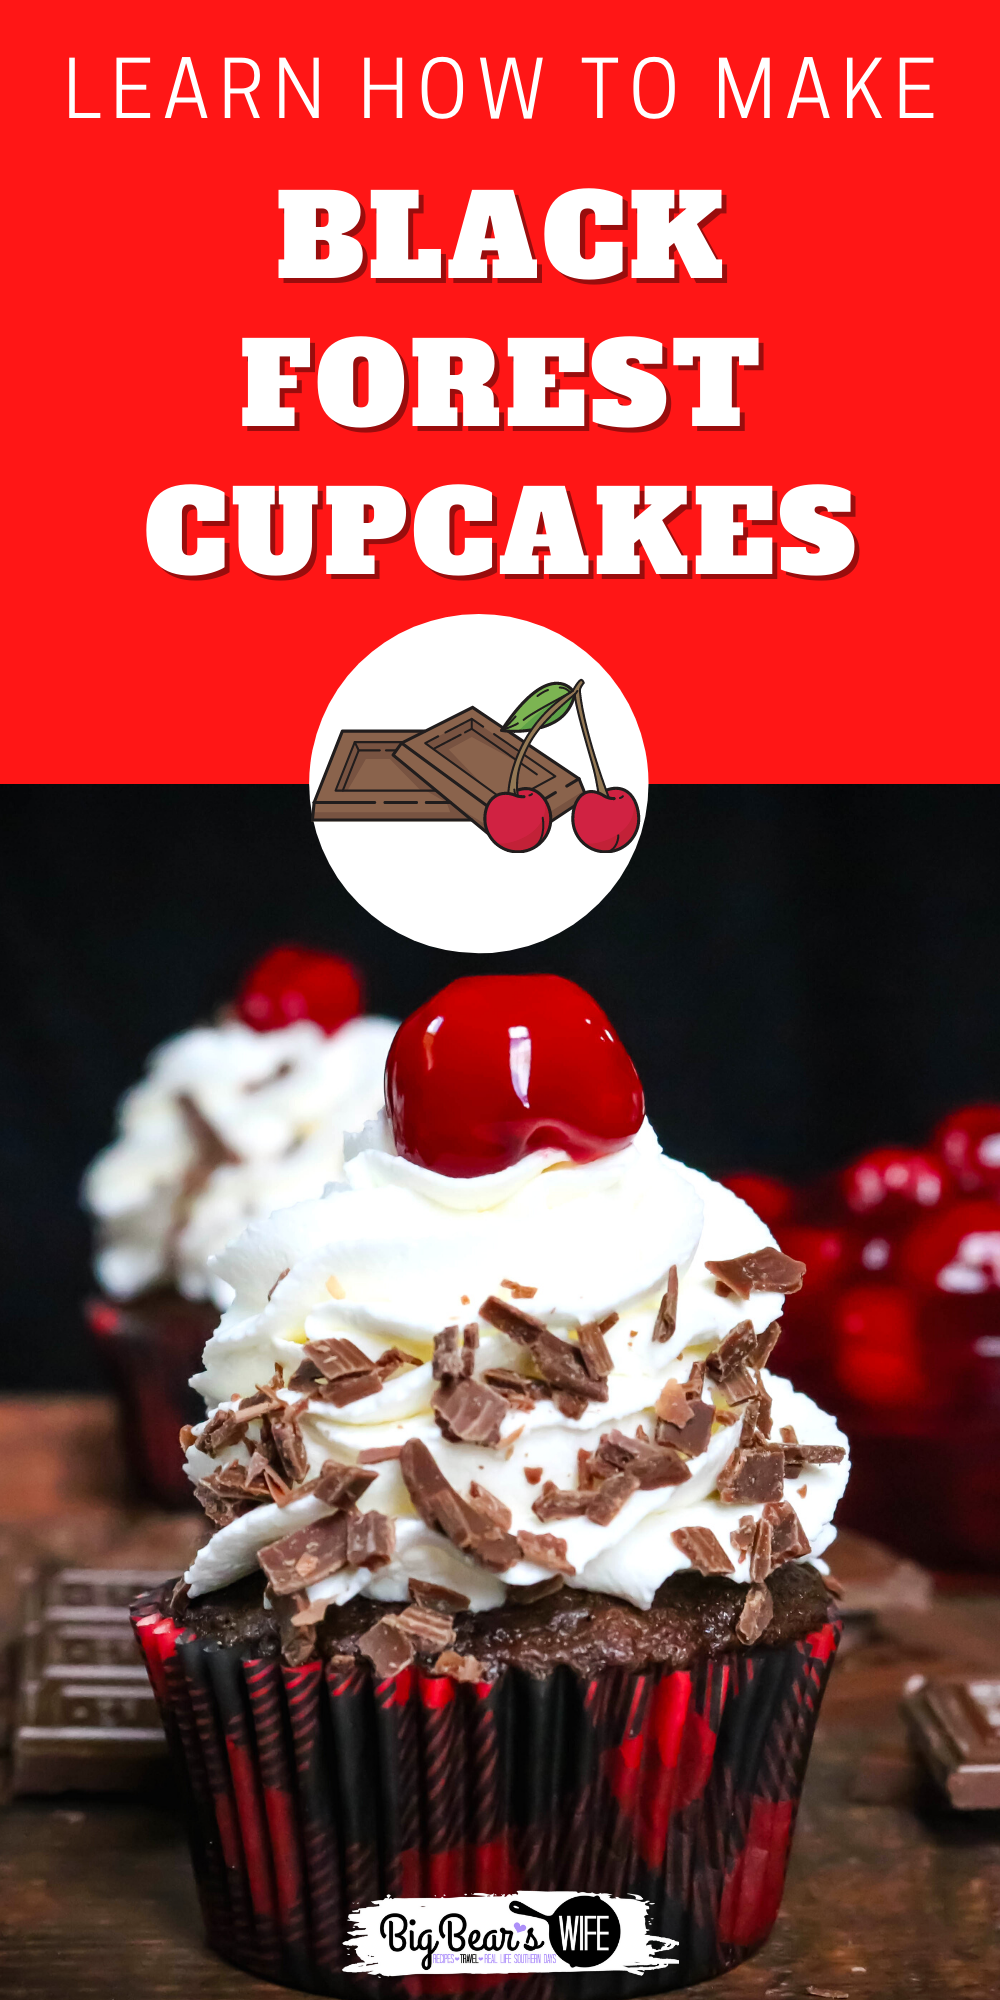  Chocolate and Cherry marry perfectly in these Black Forest Cupcakes! Chocolate cupcakes filled with cherry pie filling and topped with a homemade vanilla whipped cream frosting.  via @bigbearswife